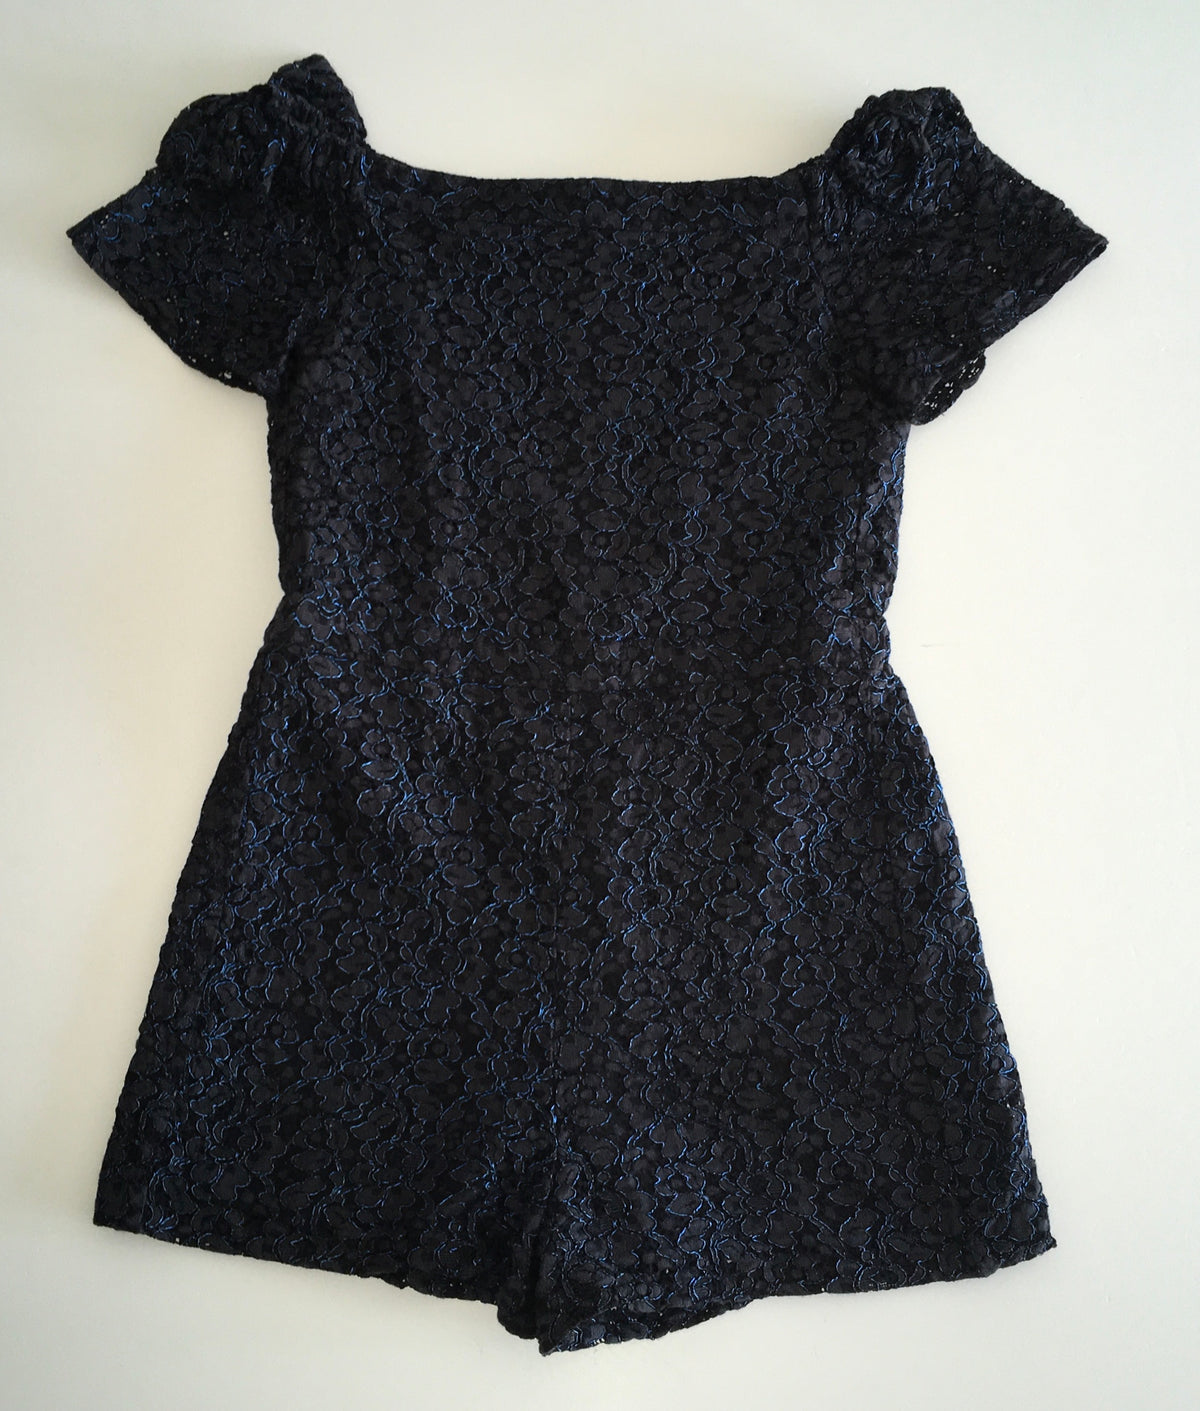 River Island Playsuit, Girls 10-11/ 11 Years